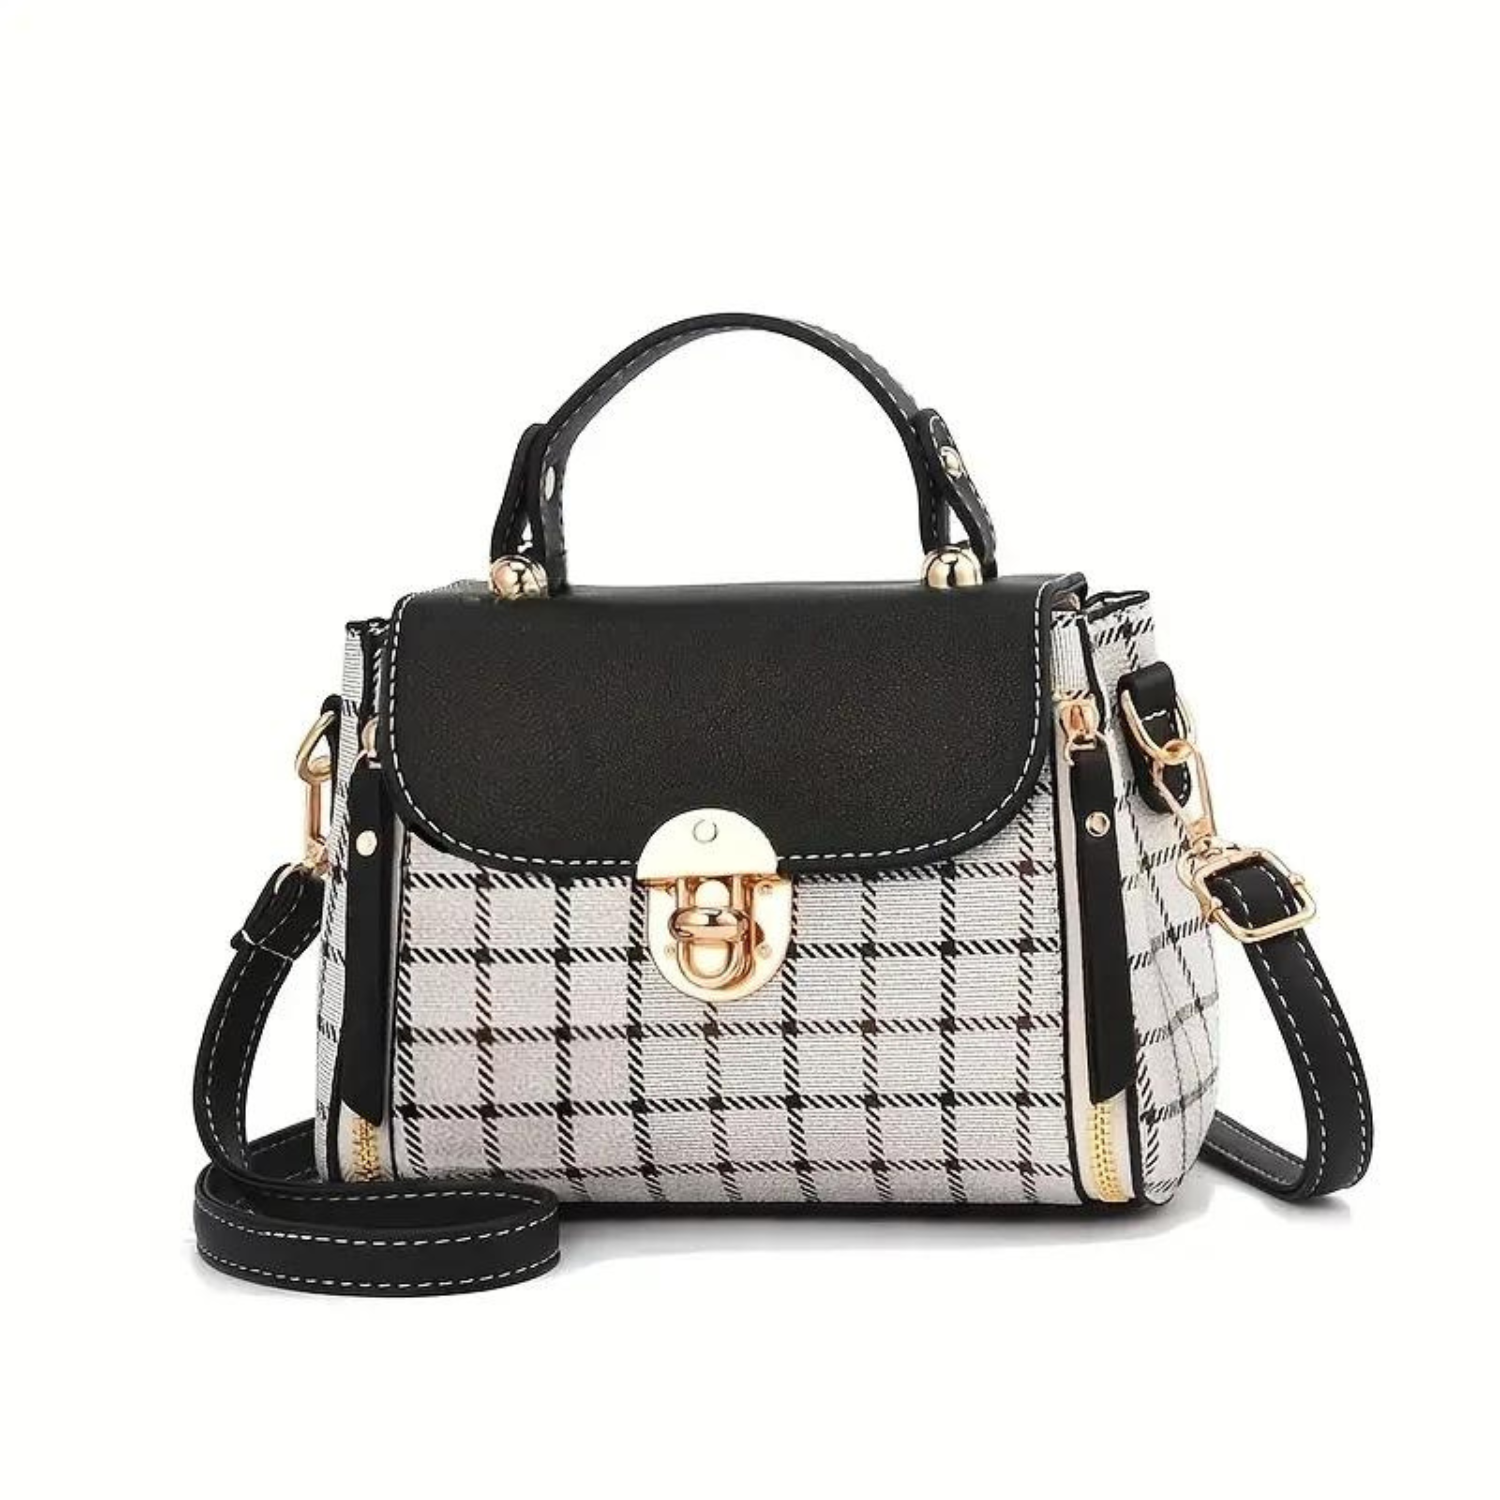 Classic Houndstooth Crossbody Bag with Gold Accents